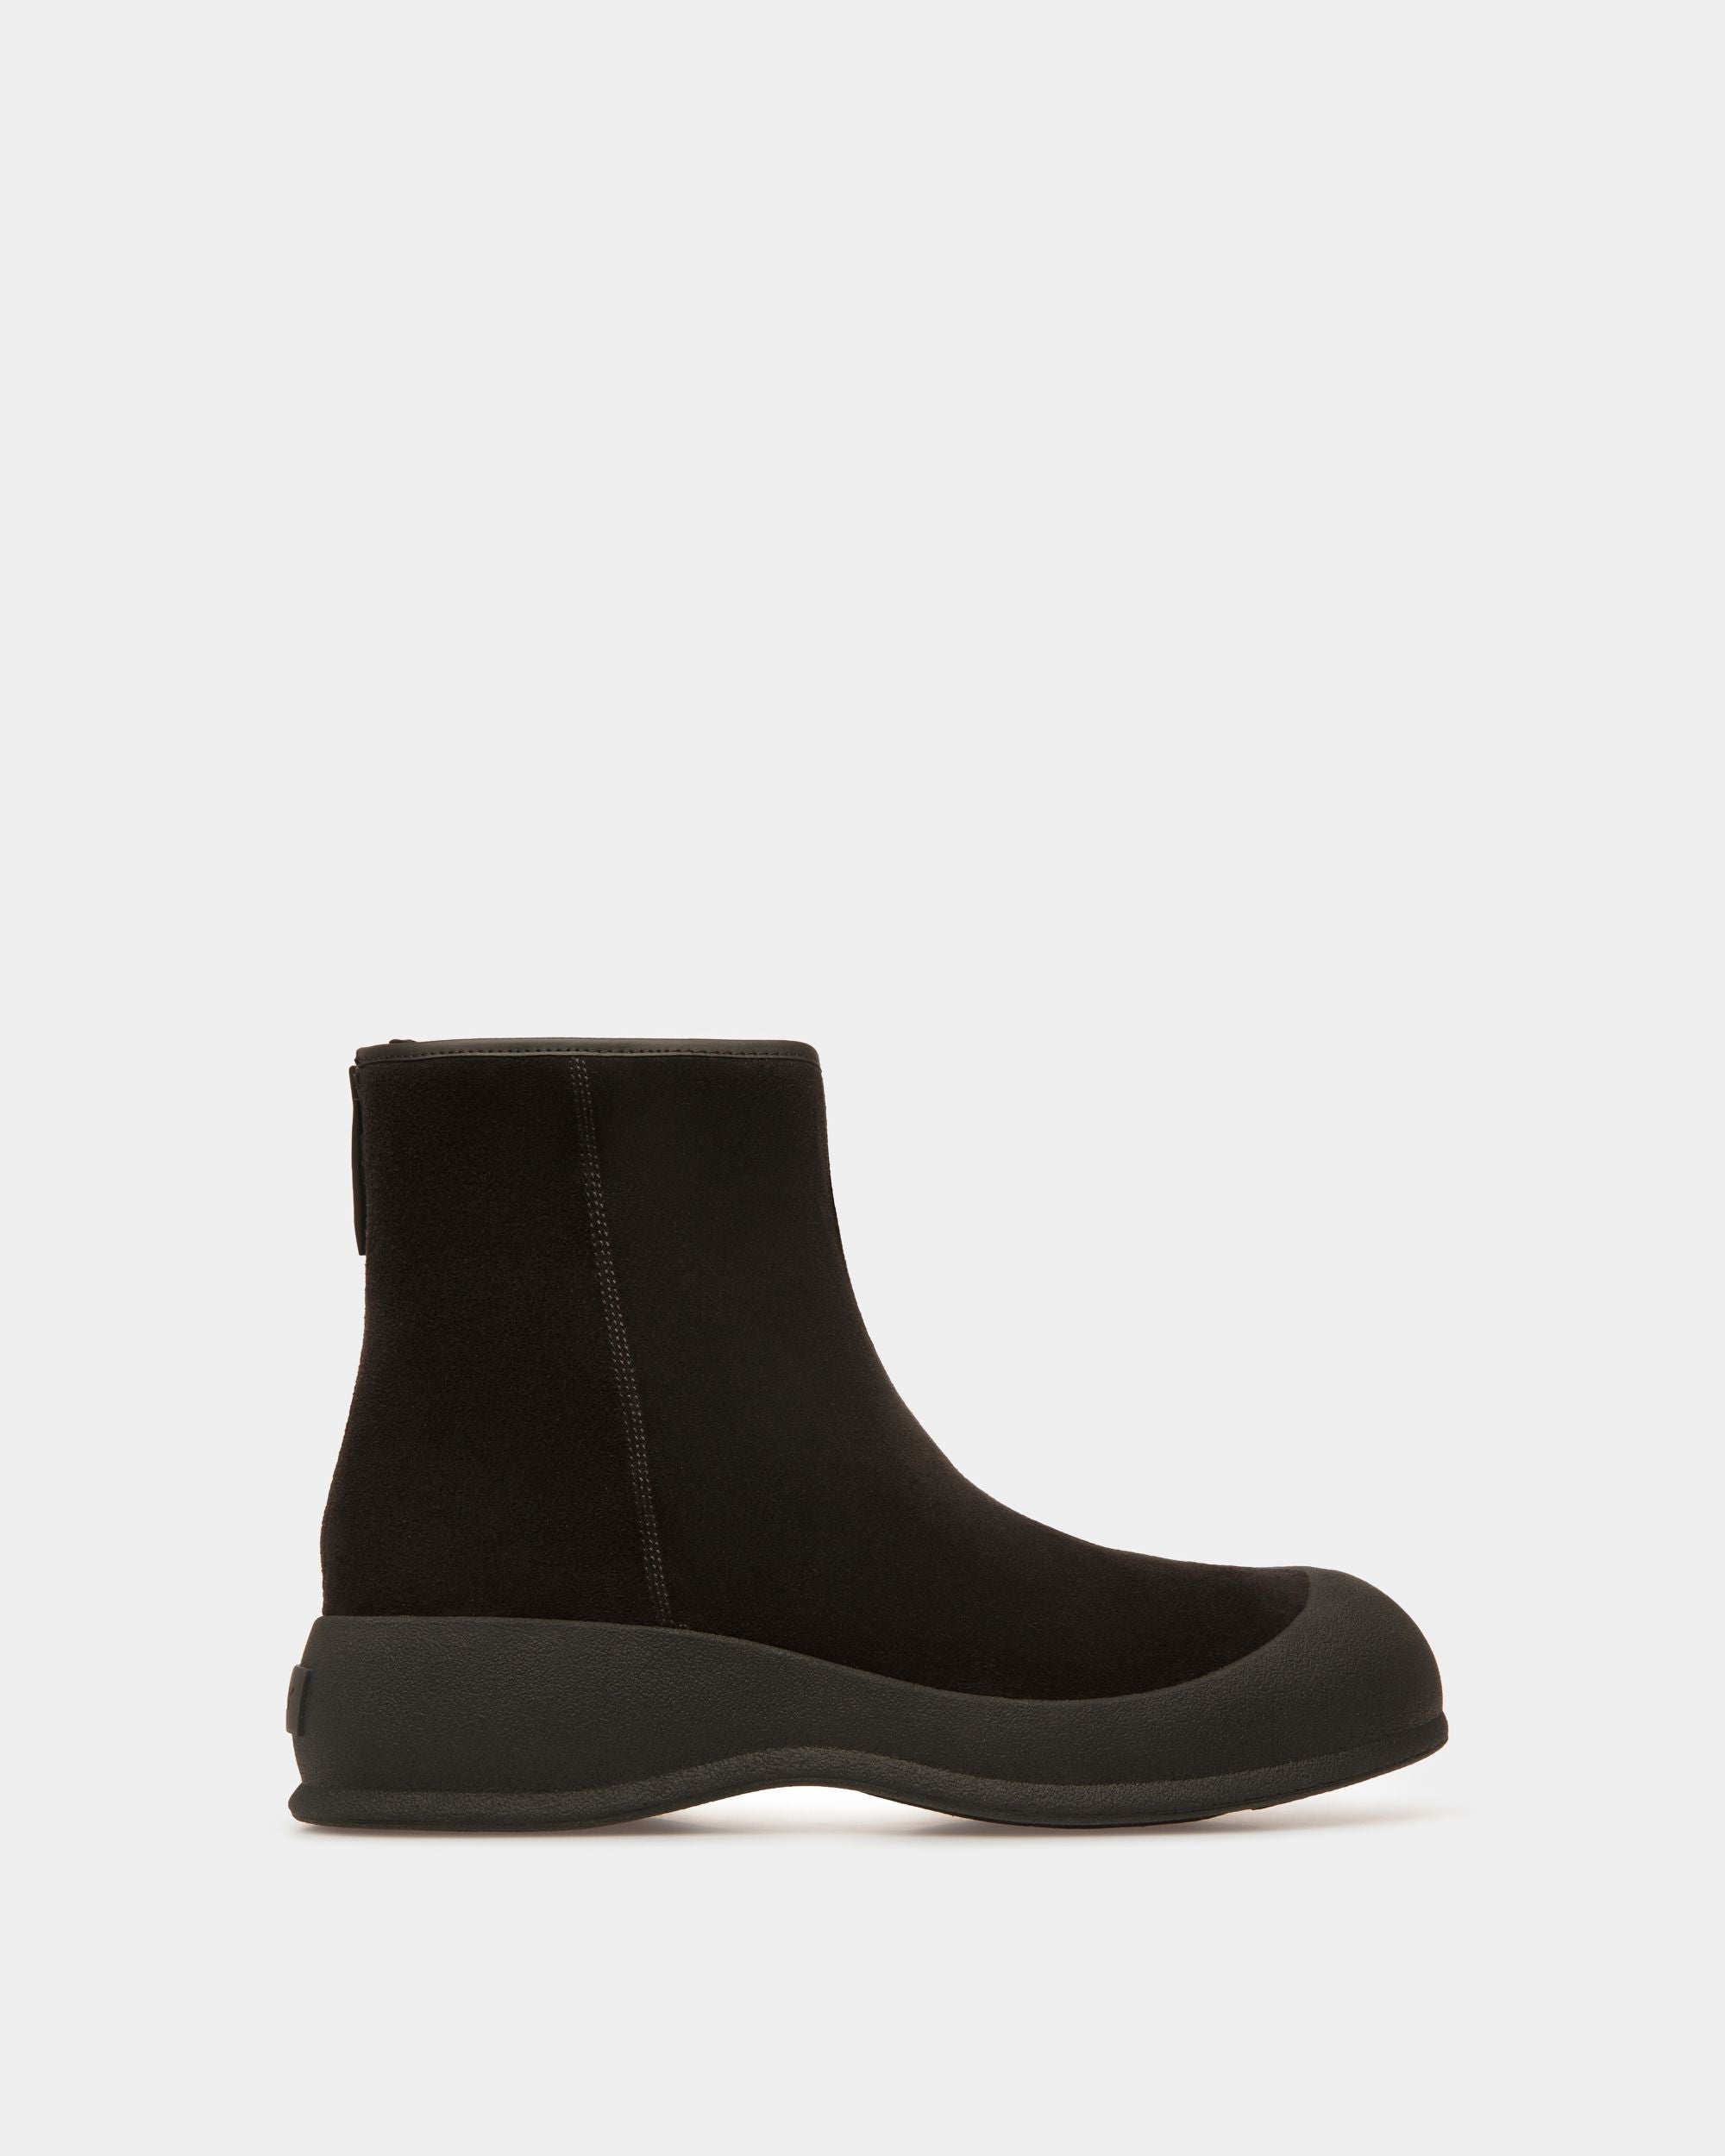 Carsey | Men's Boots | Black Leather | Bally | Still Life Side